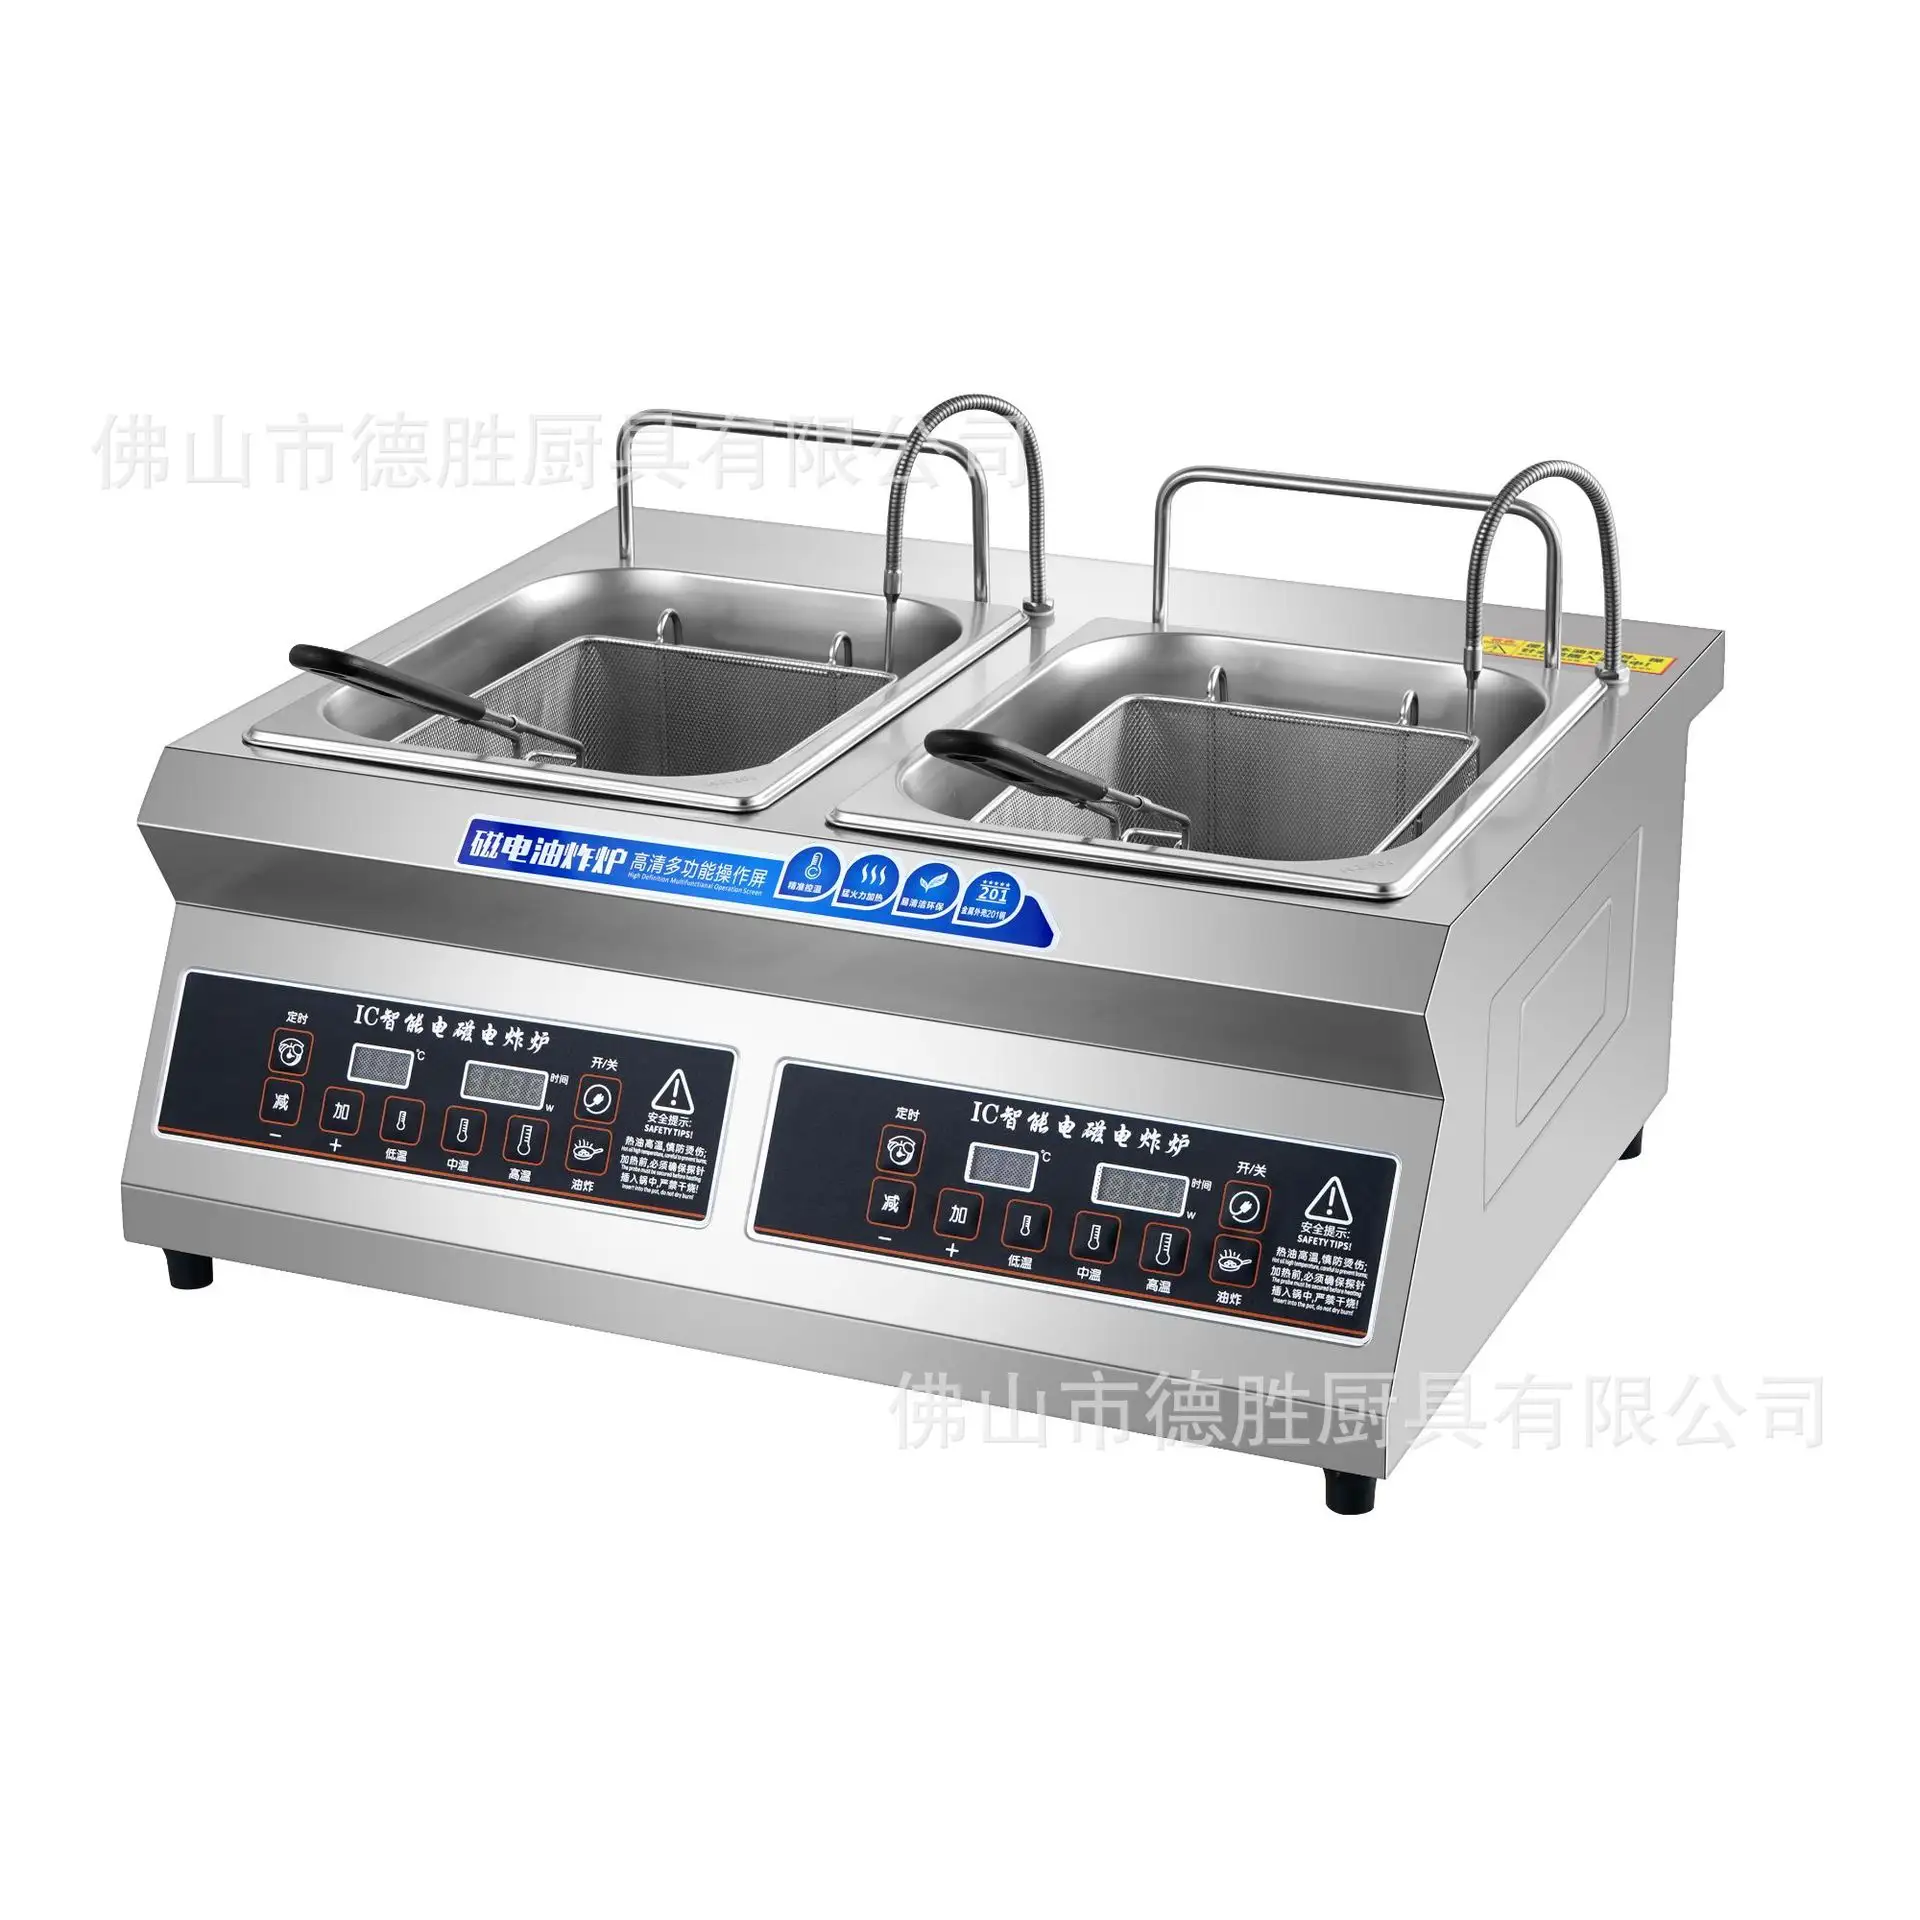 Automatic oil-water separation electric fryer fried fryer twist commercial single-cylinder large capacity electric fryer